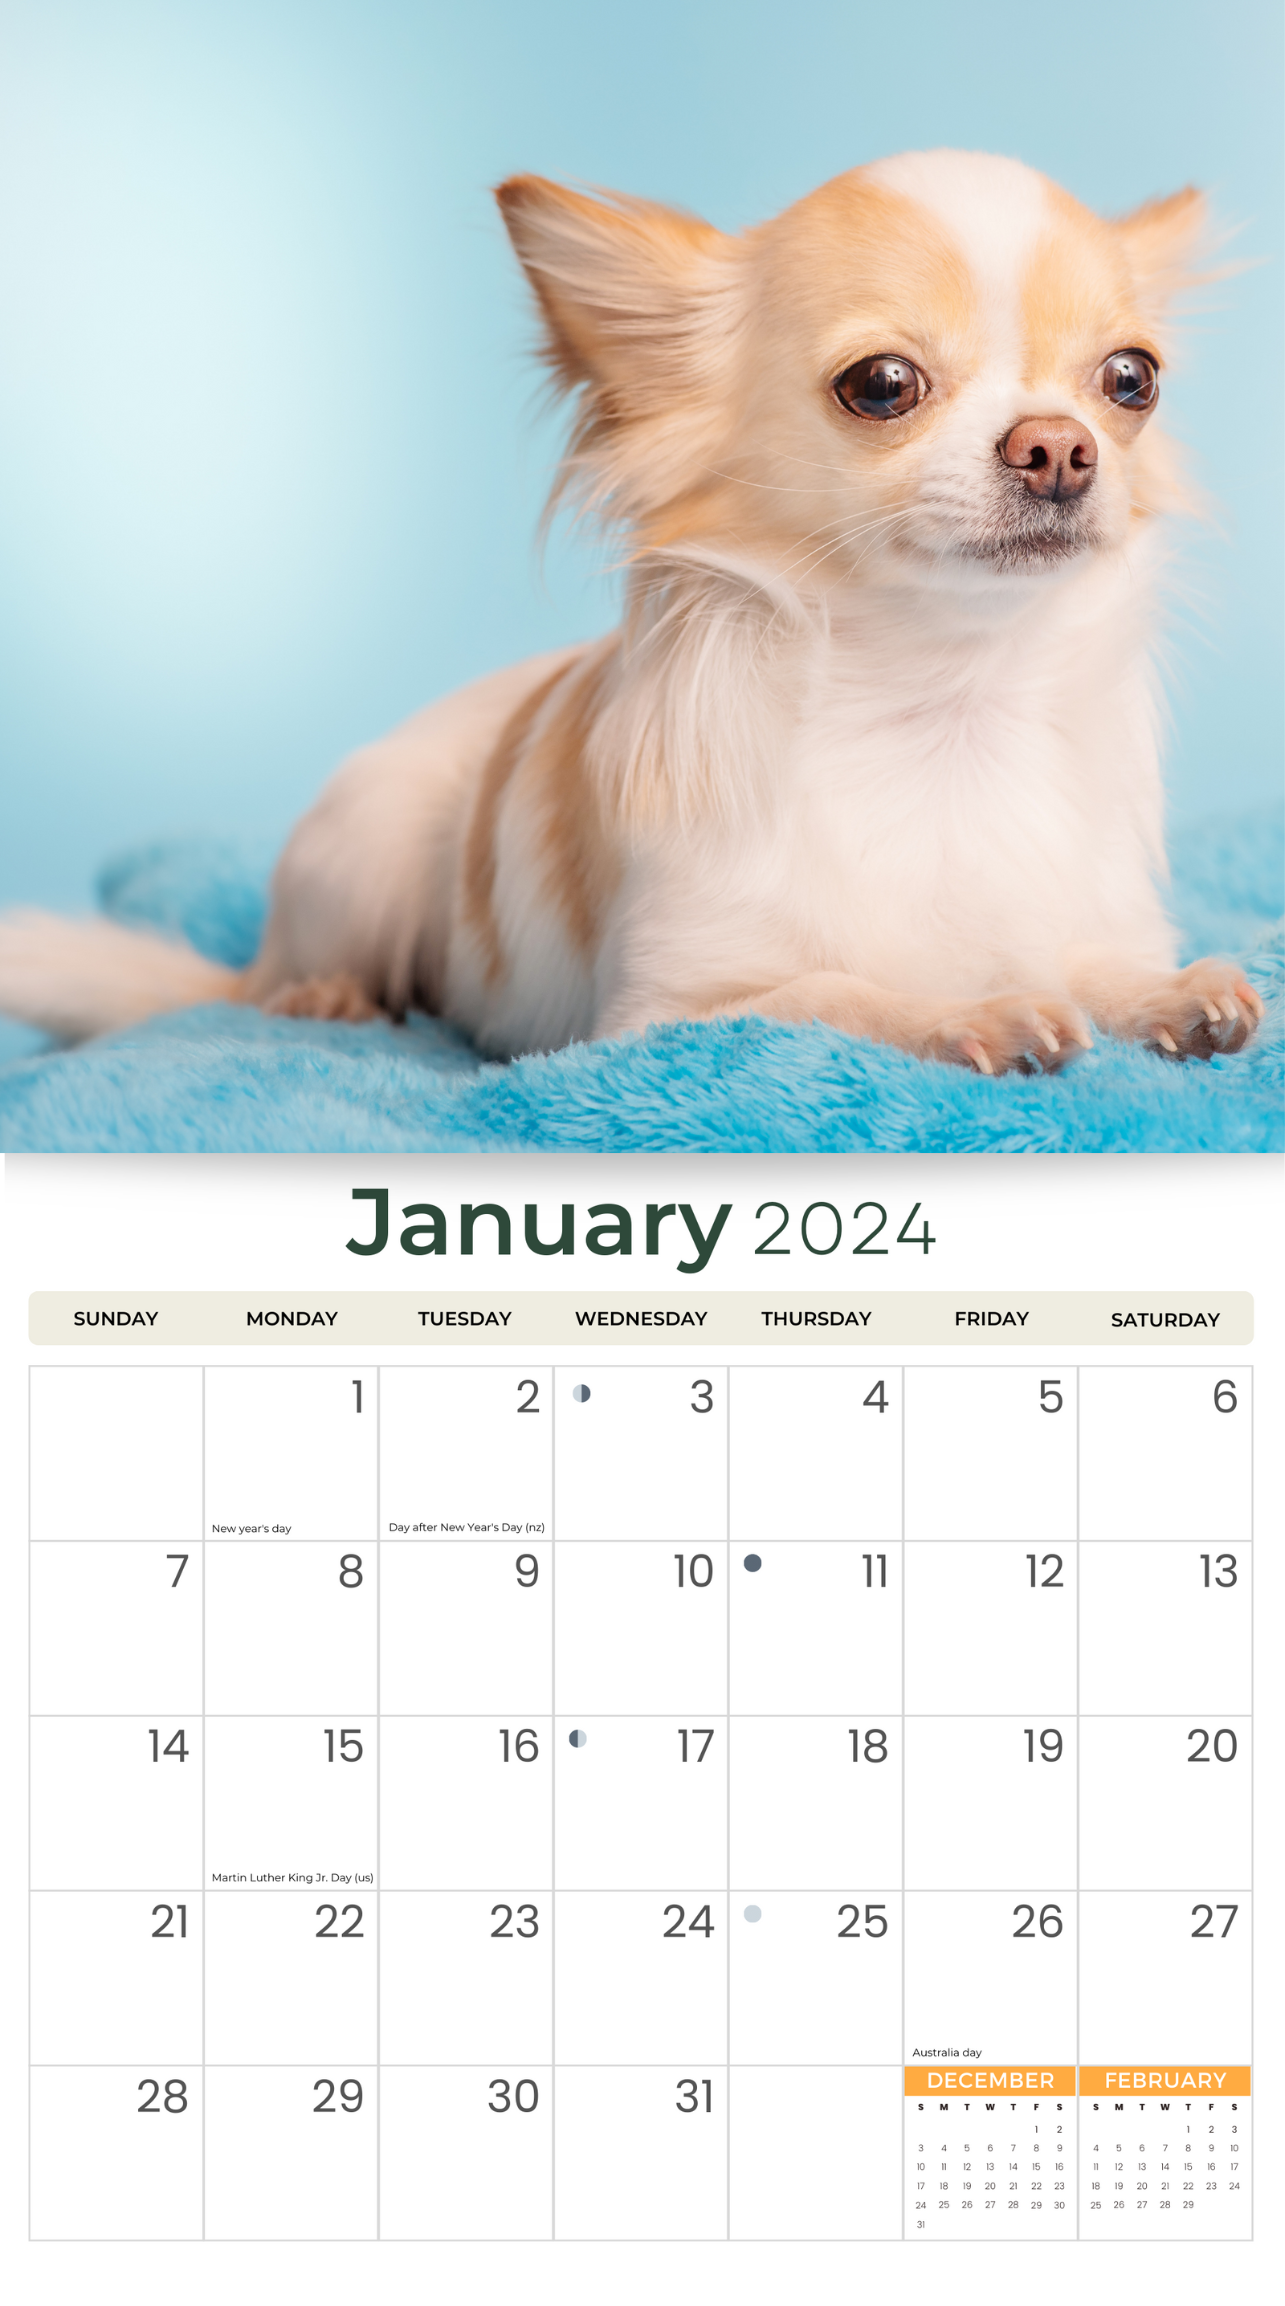 2024 Chihuahuas Deluxe Wall Calendar Dogs & Puppies Calendars By